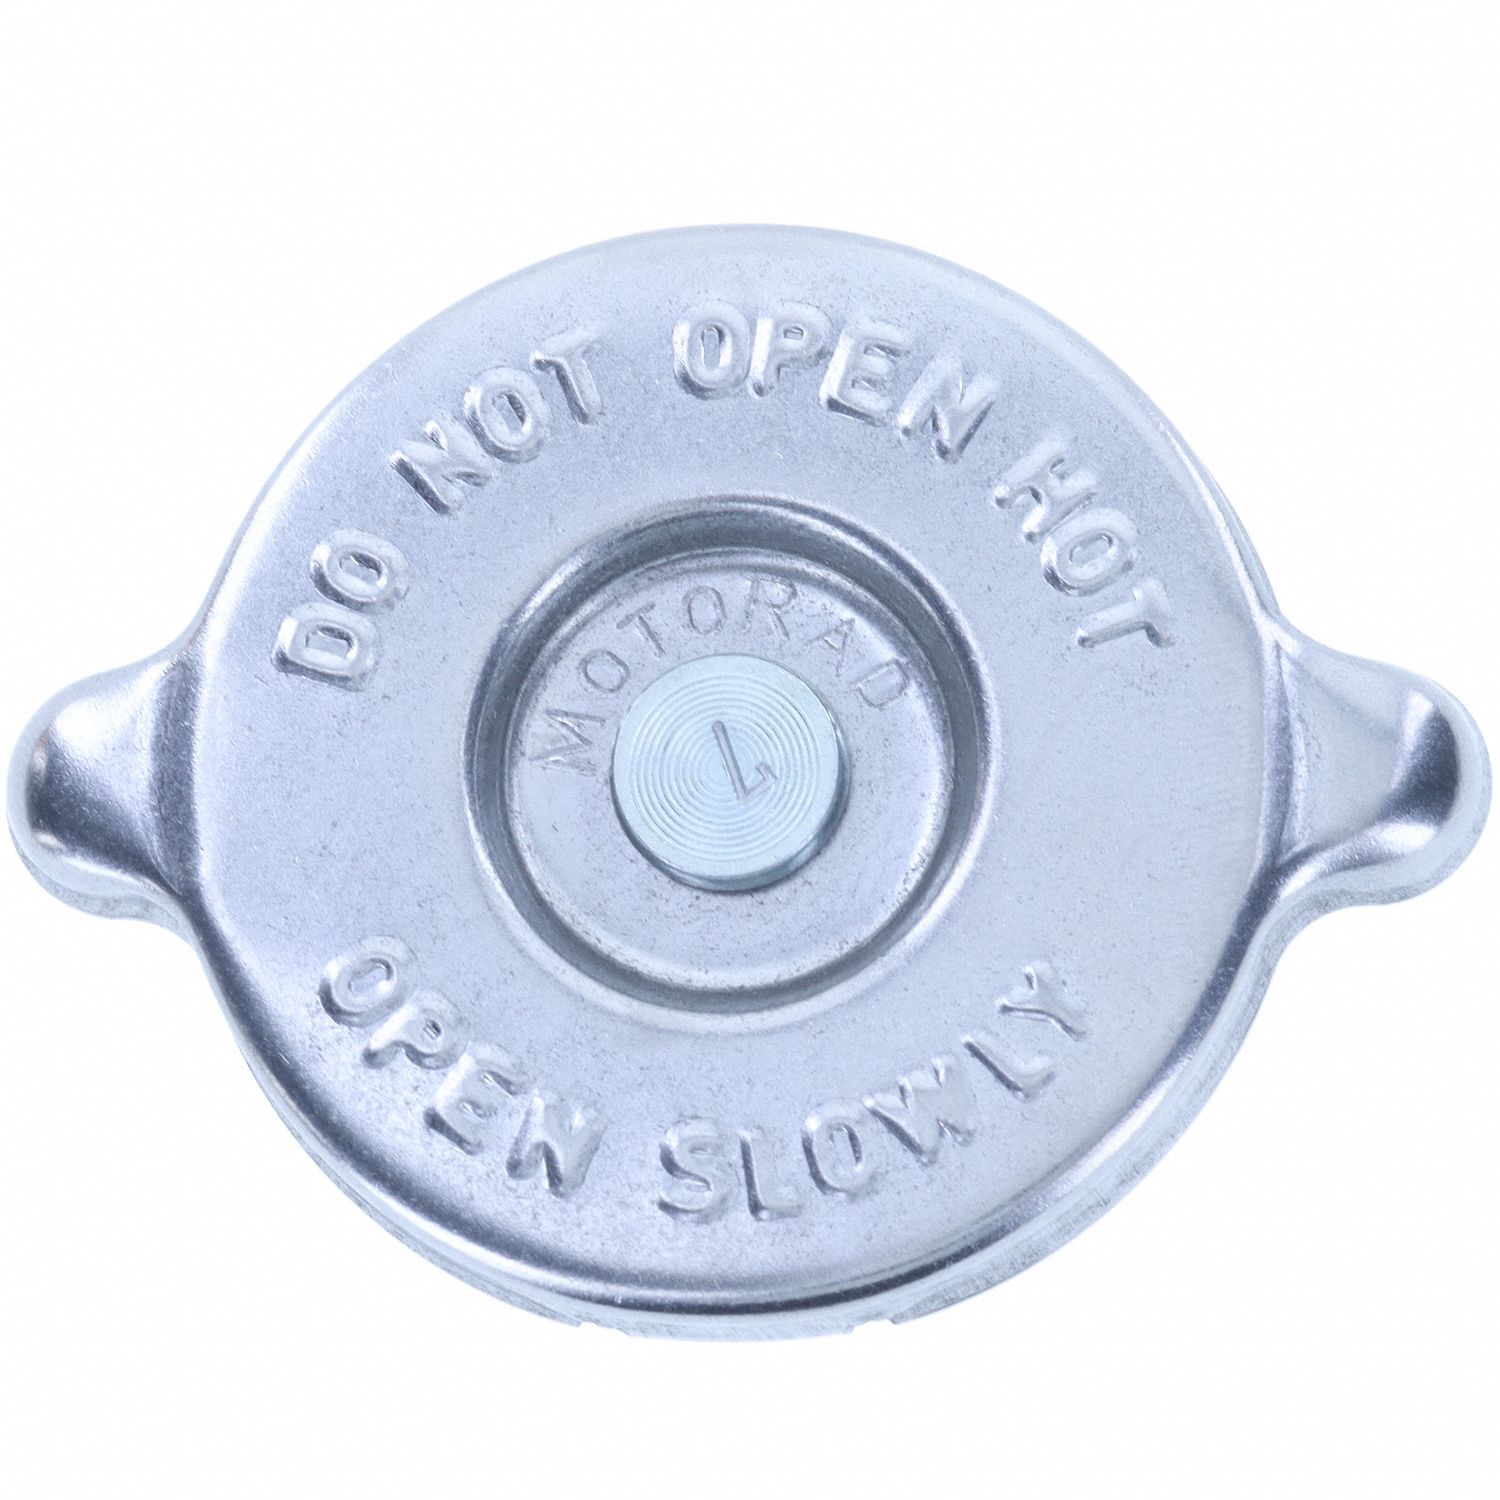 Radiator Cap: Cam-On, 6 to 8 lb, 7 psi, A Size Neck